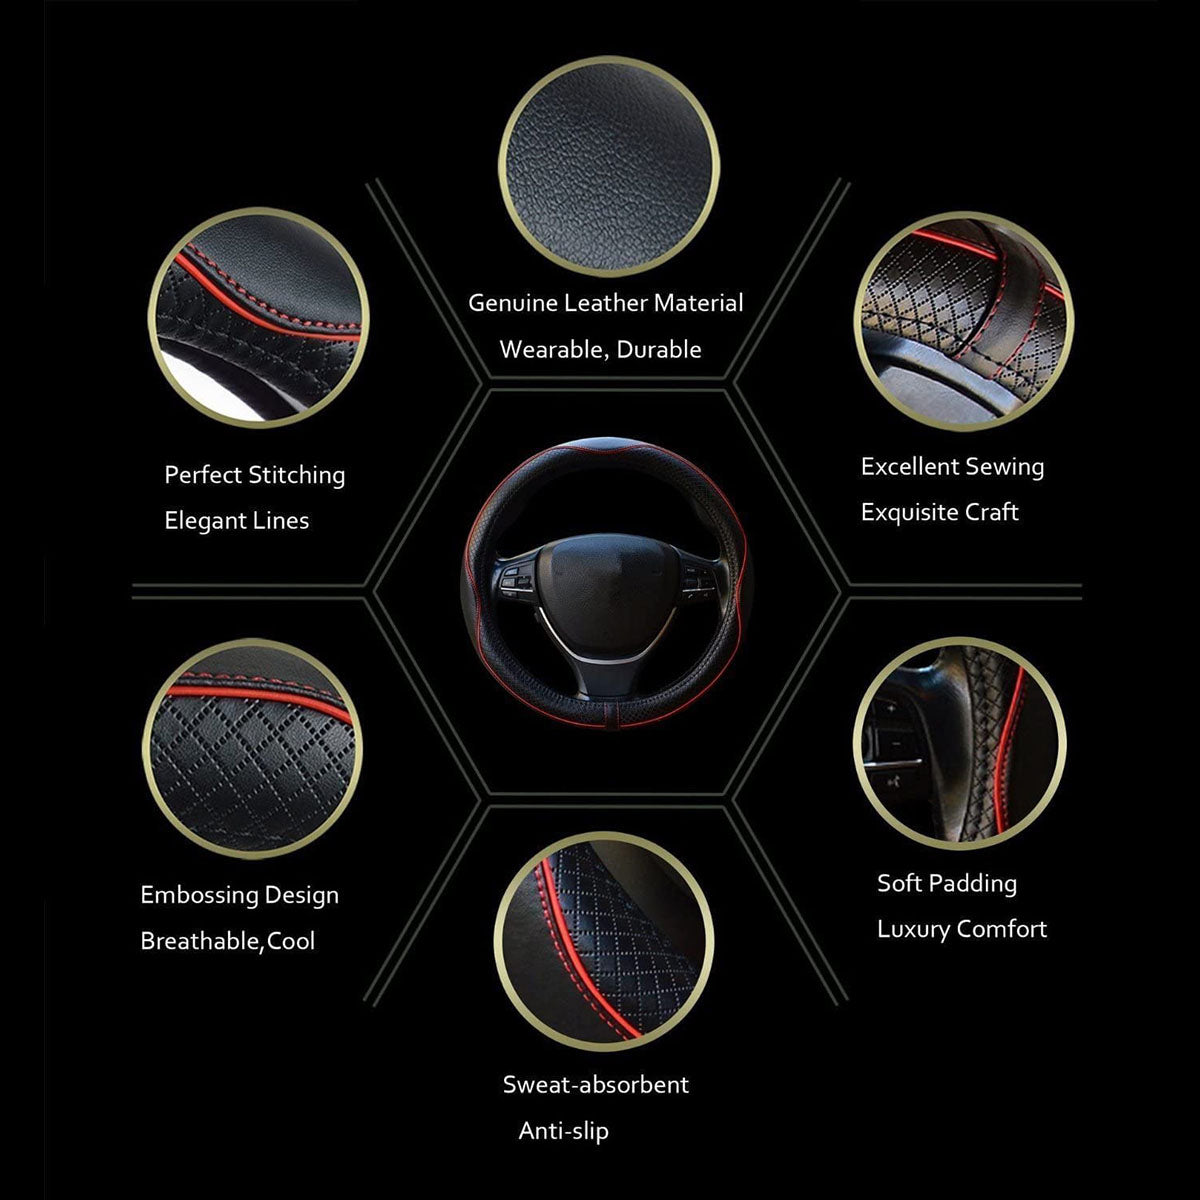 Car Steering Wheel Cover, Custom For Your Cars, Anti-Slip, Safety, Soft, Breathable, Heavy Duty, Thick, Full Surround, Sports Style, Car Accessories HY18990